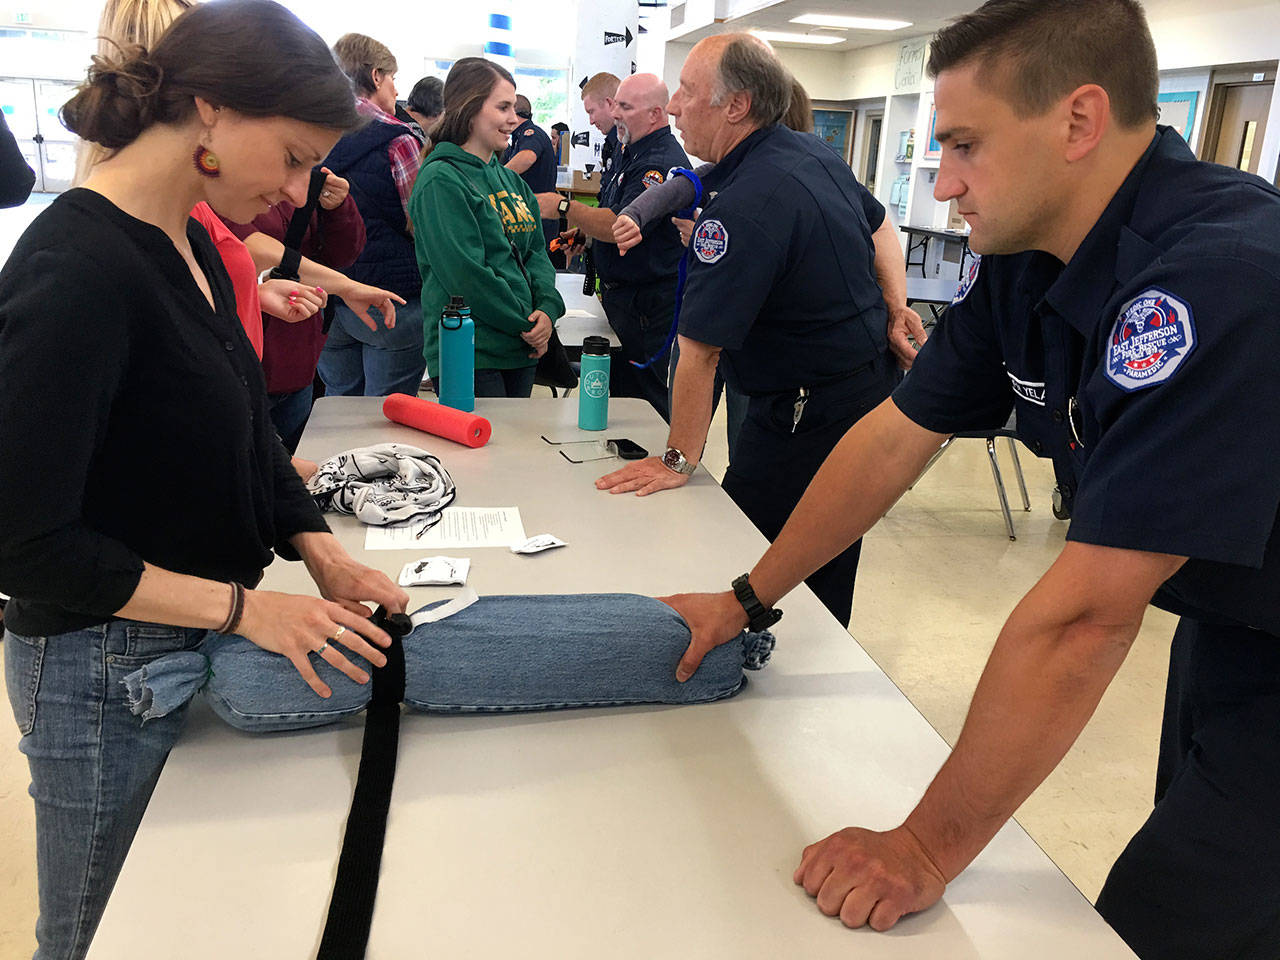 East Jefferson Fire-Rescue team member Pete Yelaca teaches how to apply a tourniquet during the Chimacum School District’s “Stop the Bleed” training Monday. (East Jefferson Fire Rescue)